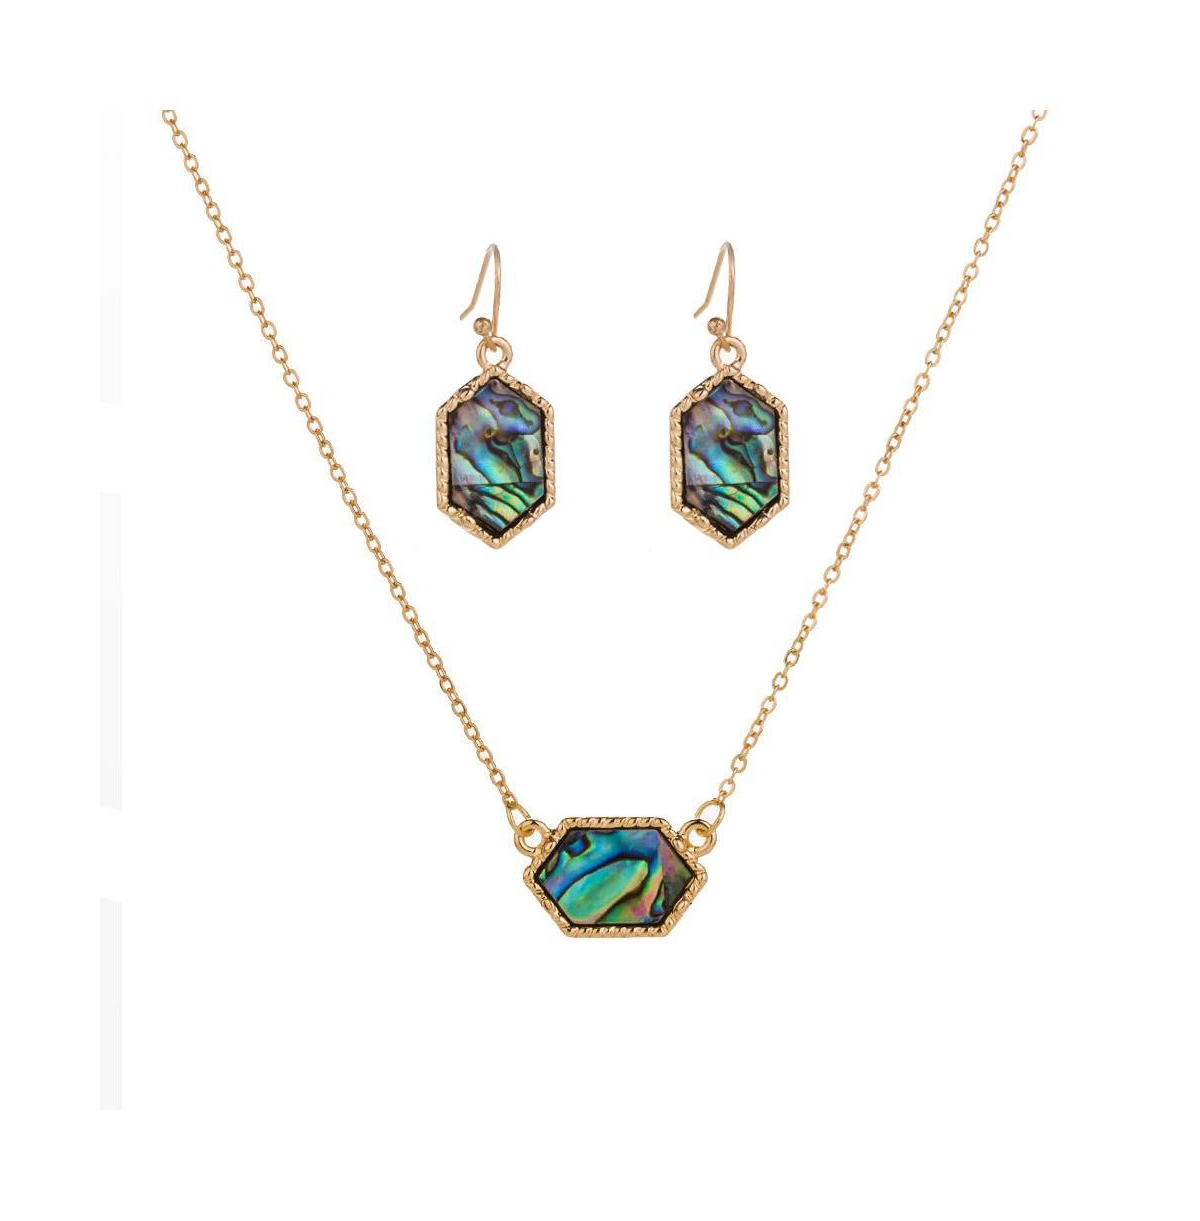 Hexagon Abalone Necklace and Abalone Earrings Set - Gold